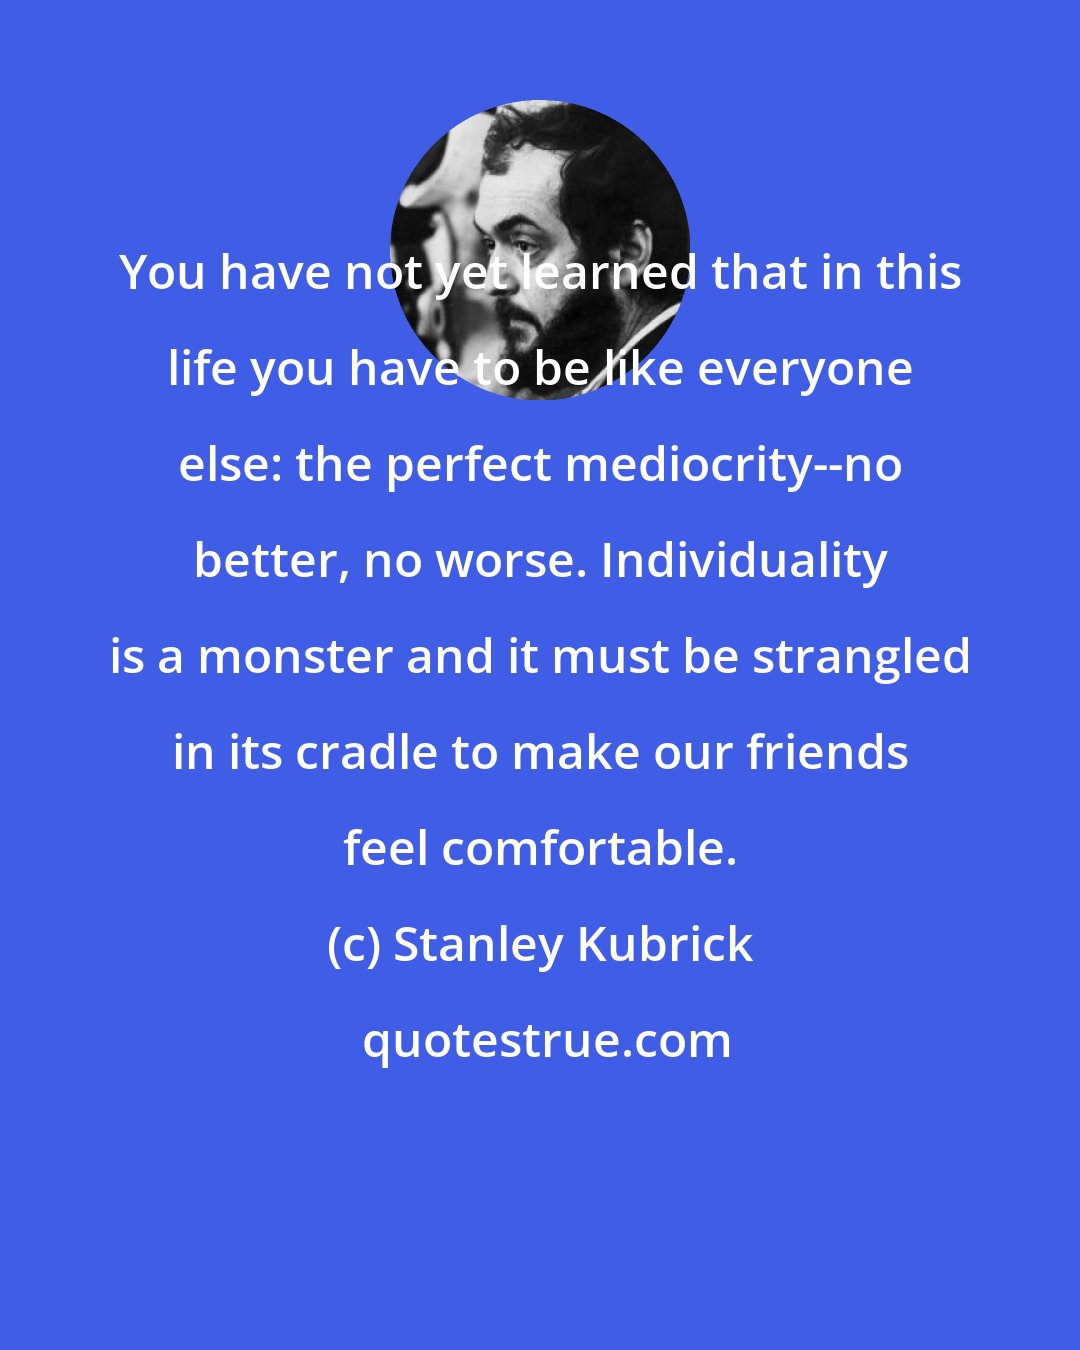 Stanley Kubrick: You have not yet learned that in this life you have to be like everyone else: the perfect mediocrity--no better, no worse. Individuality is a monster and it must be strangled in its cradle to make our friends feel comfortable.